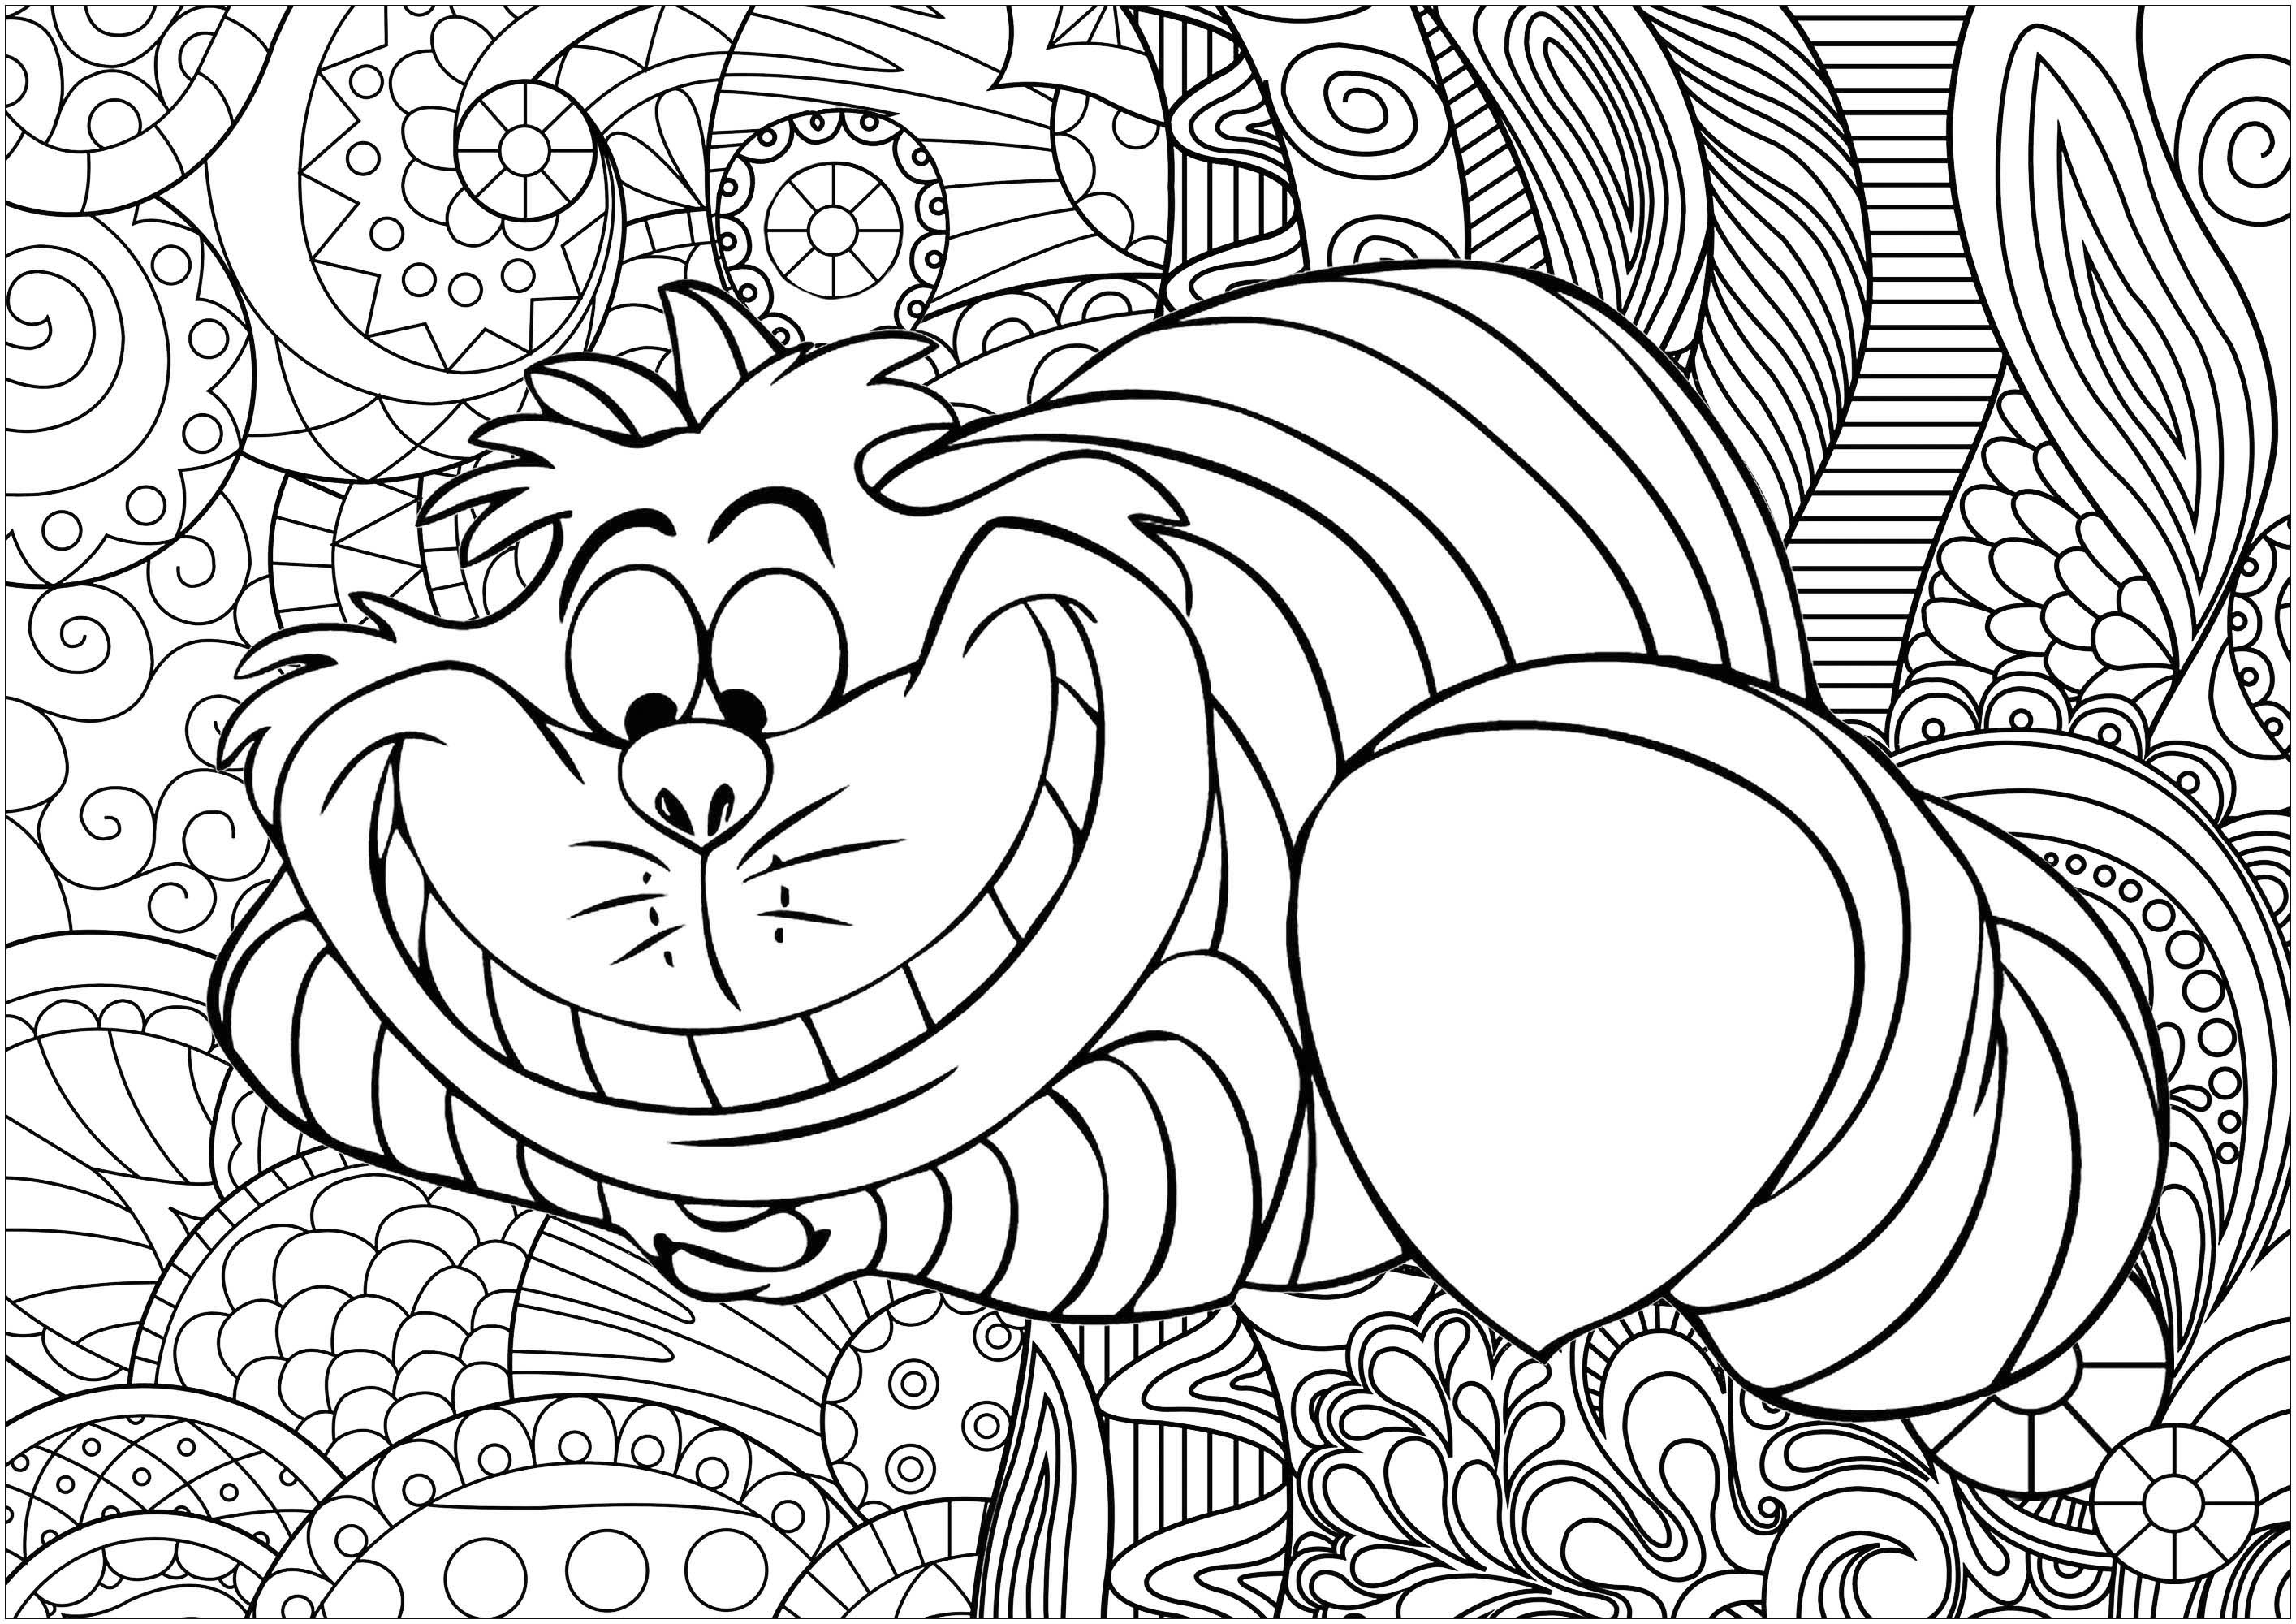 Cheshire cat with patterns in background - Cats Adult Coloring Pages